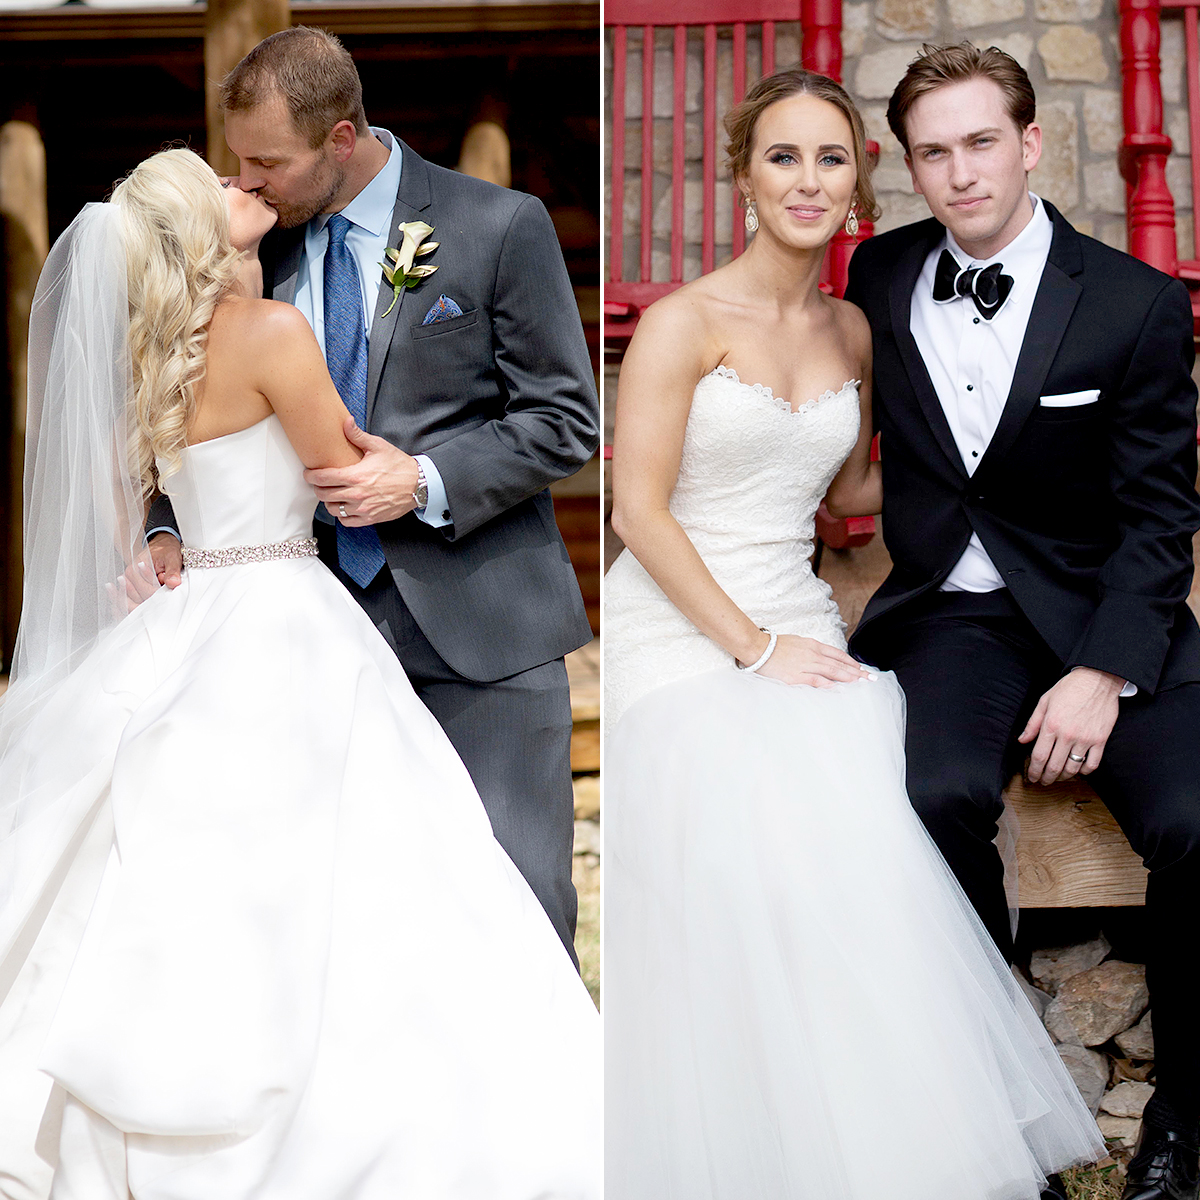 ‘Married At First Sight’ Finale Recap Which Couples Stayed Together